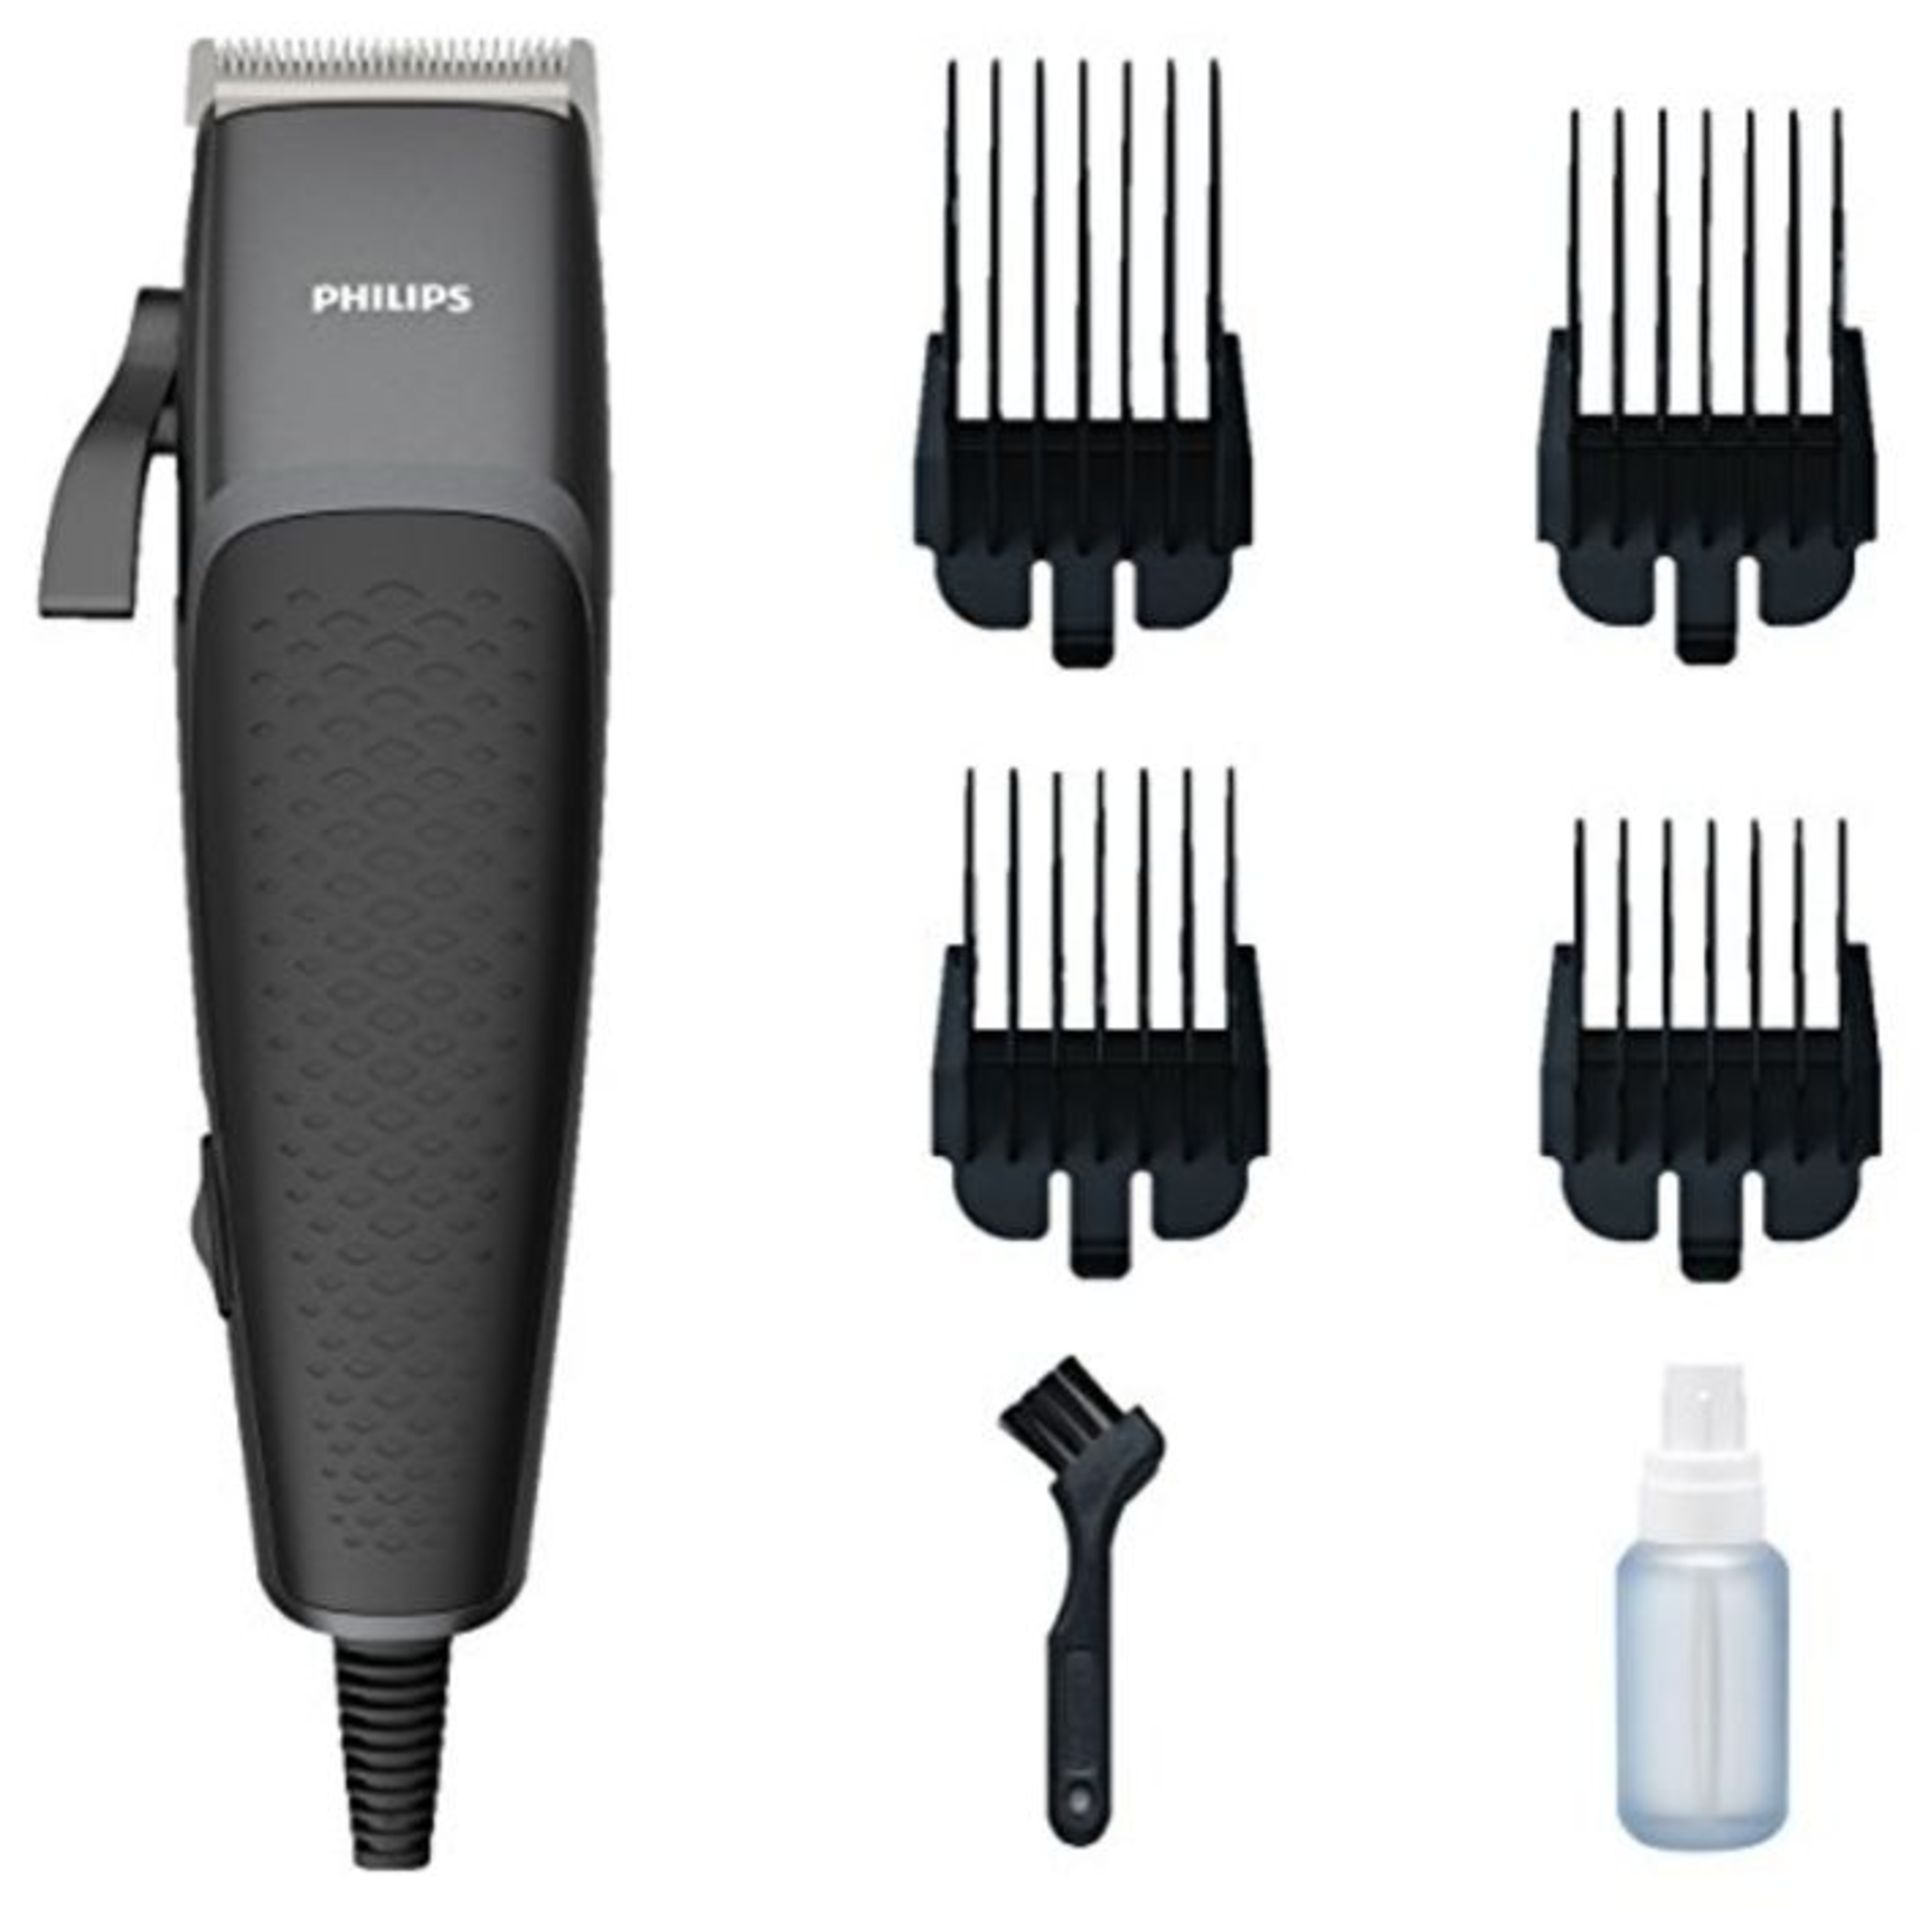 Philips Hair Clippers for Men, Series 3000 Hair Clipper and Beard Trimmer with Length